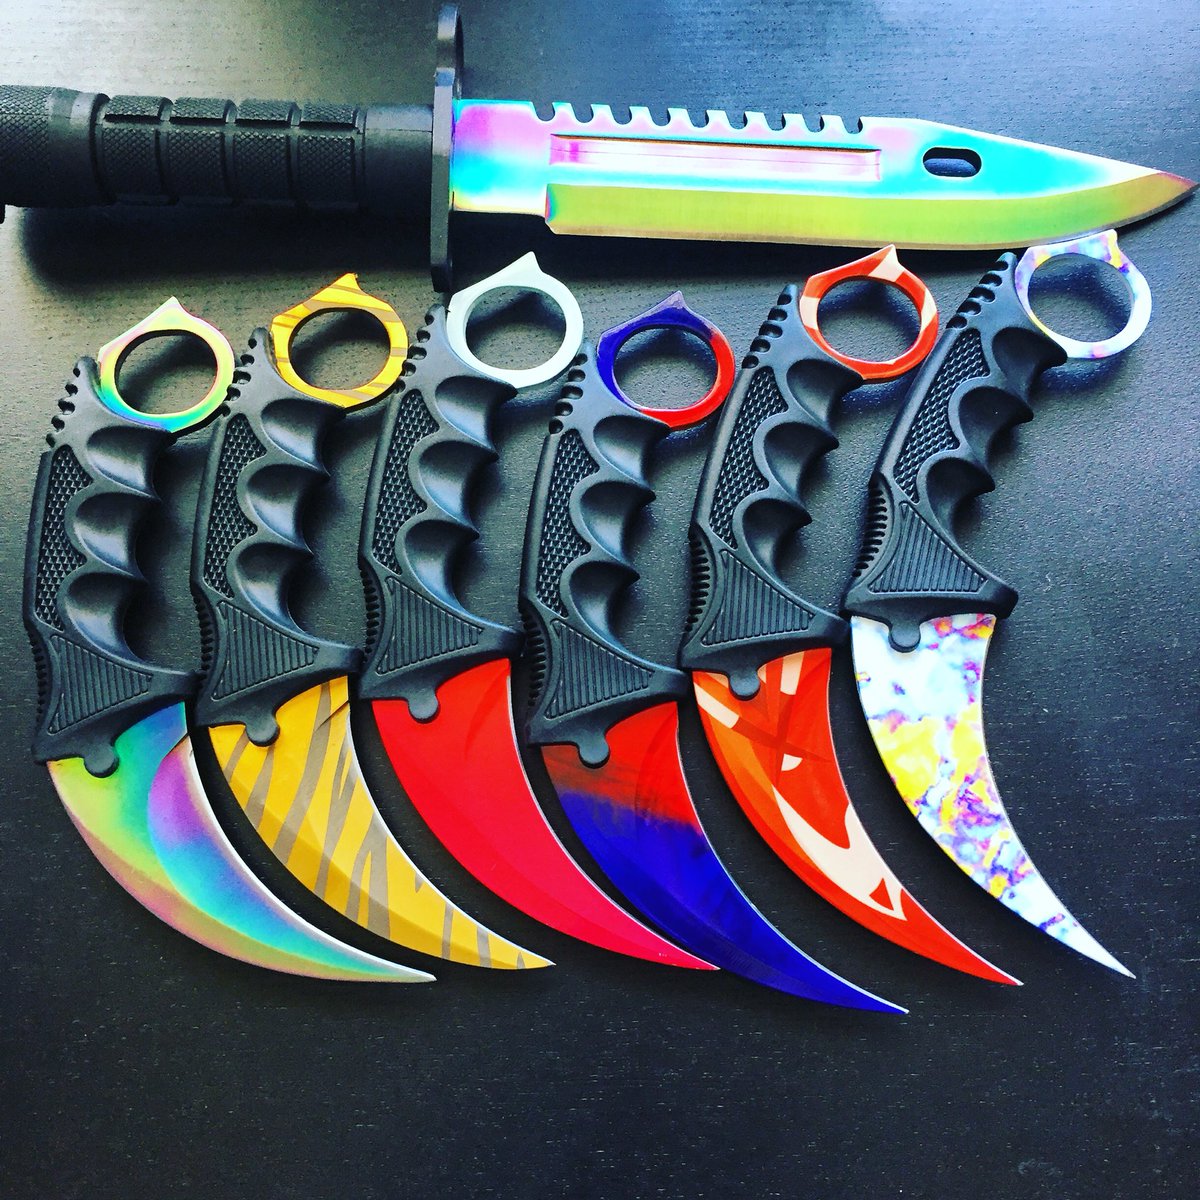 Garrett Real Life Csgo Knife Unboxing Coming To The Channel Tomorrow Big Thanks To Elementalknives T Co Sliclhvngz